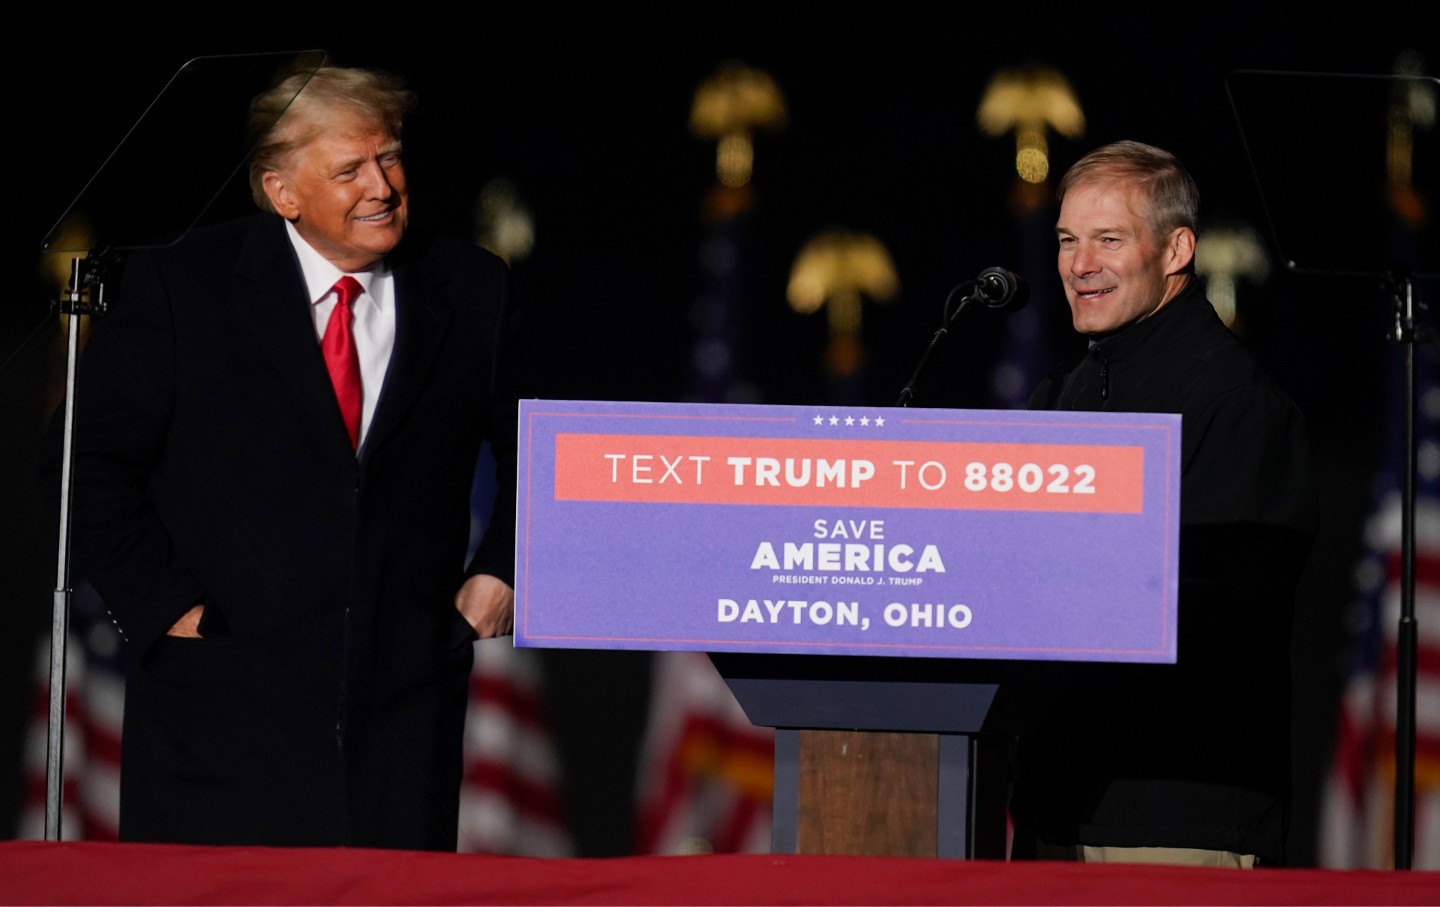 Former president Donald Trump welcomes Representative Jim Jordan (R-Ohio) to the stage at a rally in support of Ohio Senate candidate J.D. Vance in Vandalia, Ohio, on November 7, 2022.